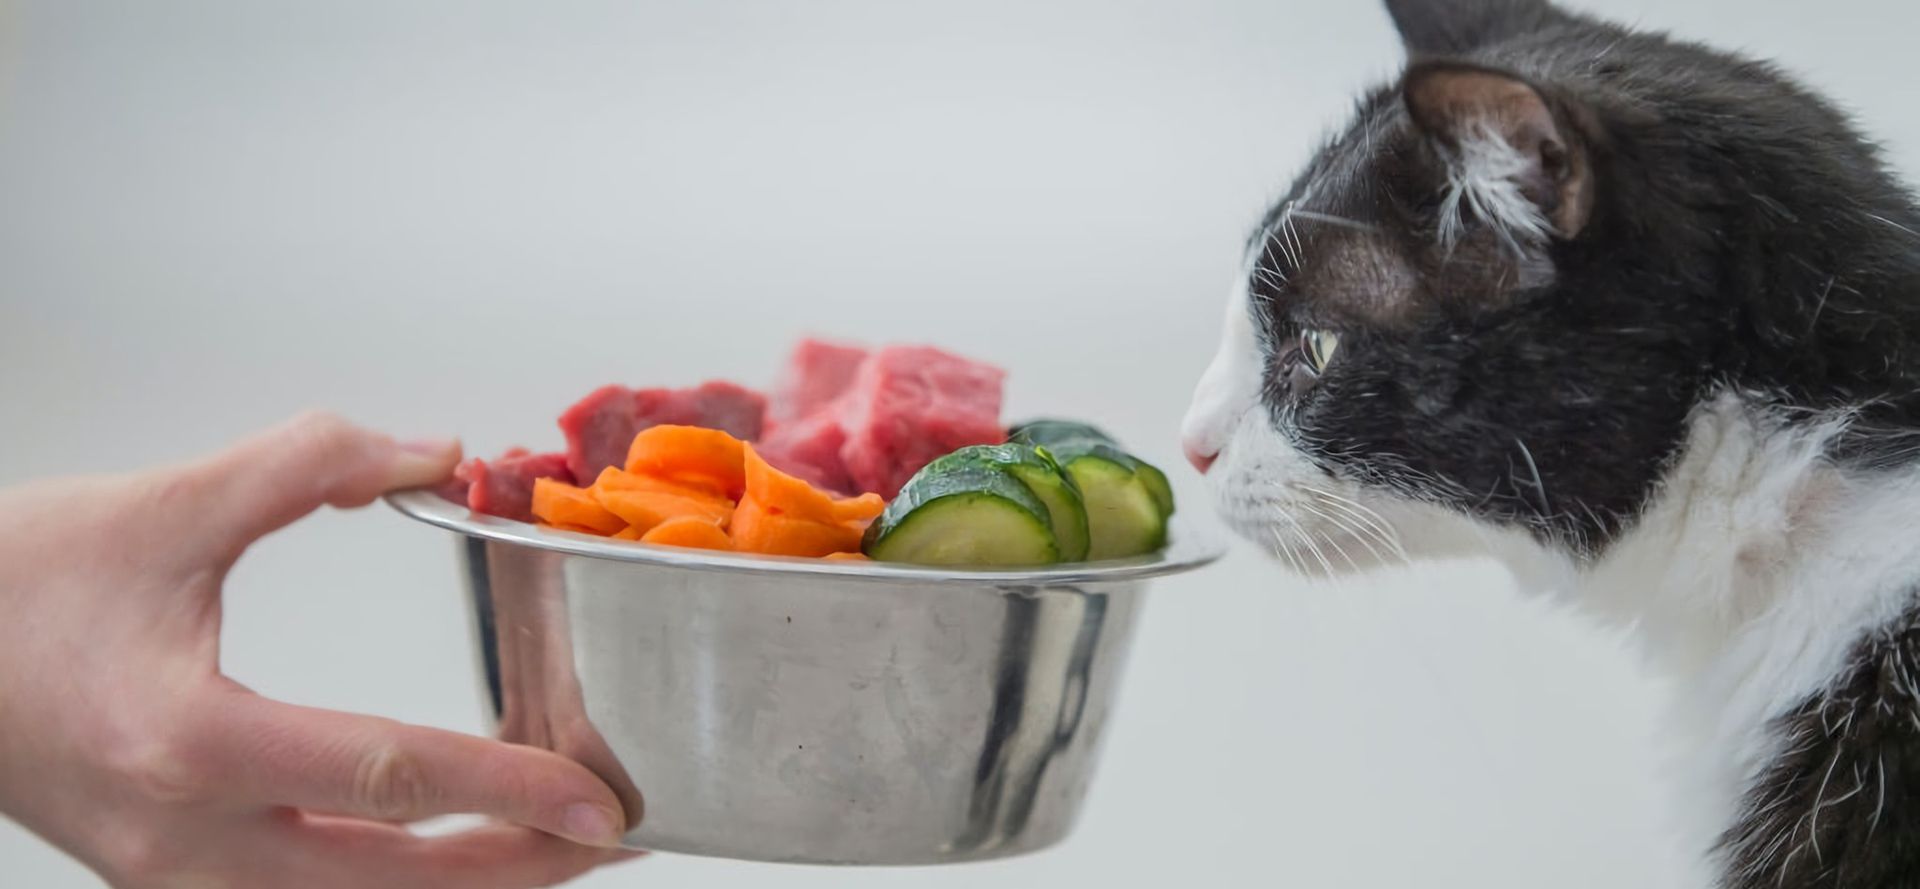 Cat And Serving Of Vegetables.